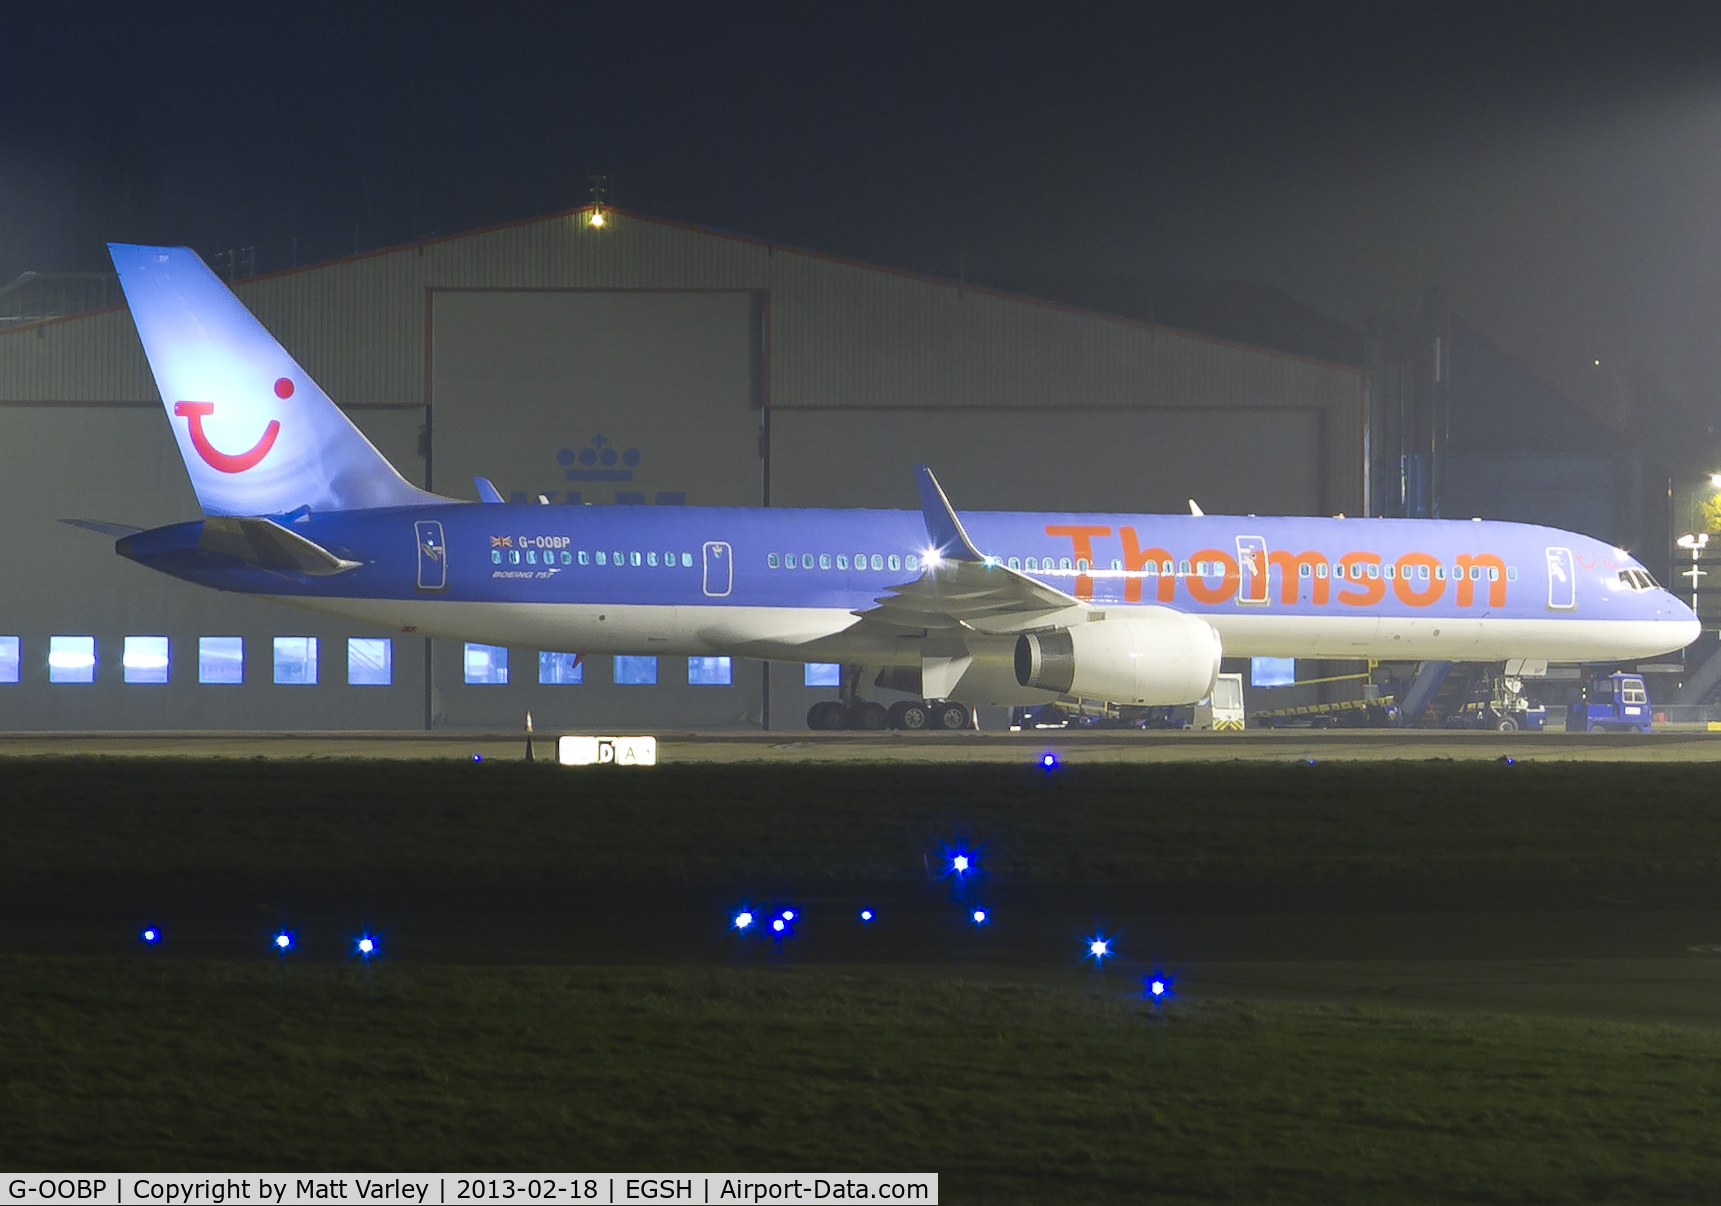 G-OOBP, 2000 Boeing 757-2G5 C/N 30394, Sat on a misty stand 5 at EGSH after arriving for spray by Air Livery.